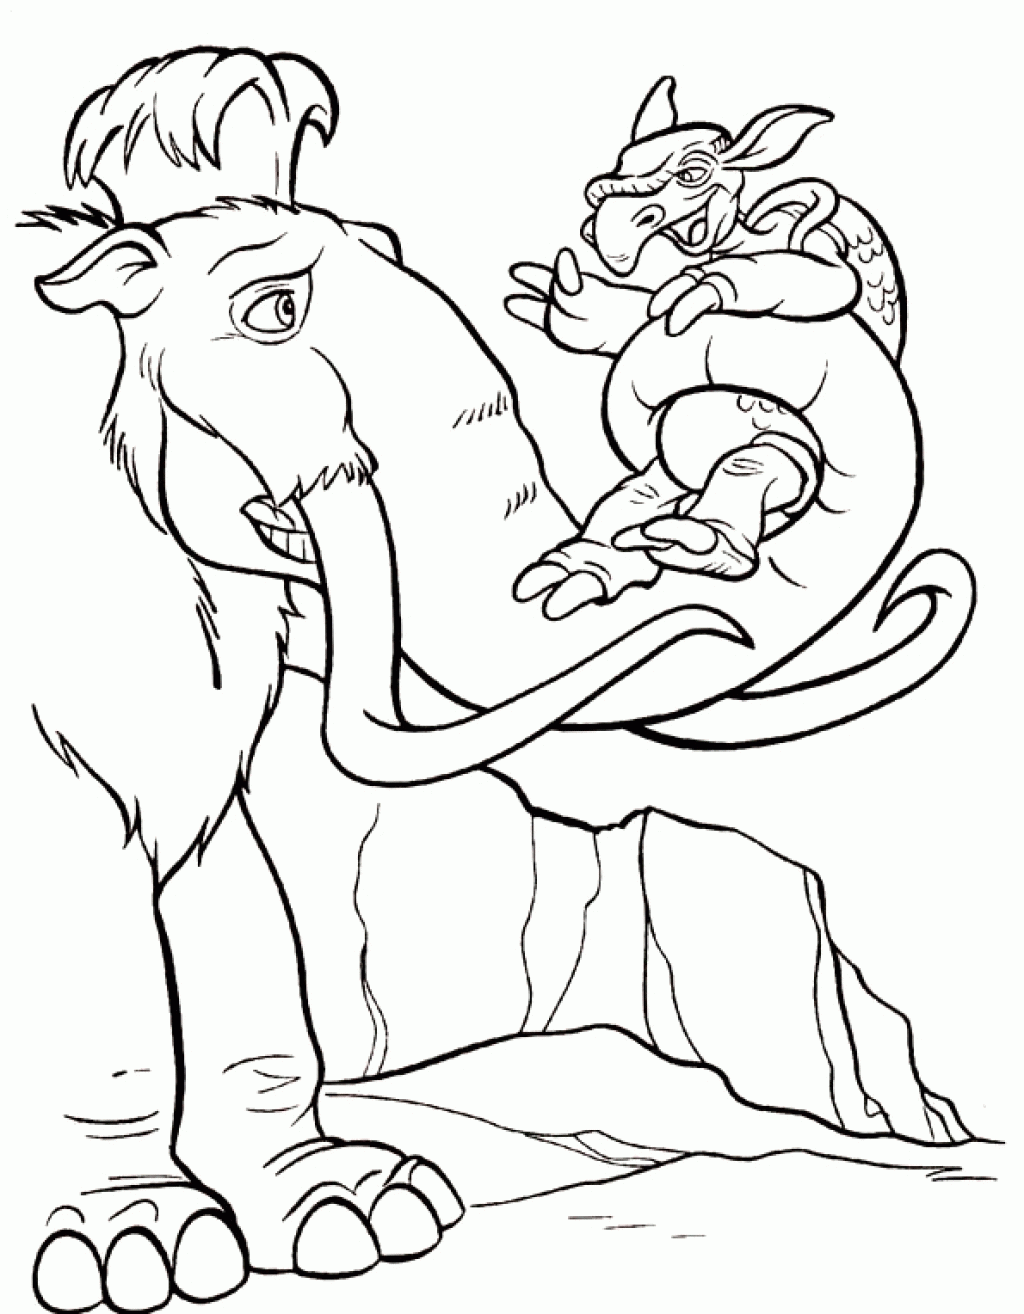 ice-age-coloring-page-0082-q1